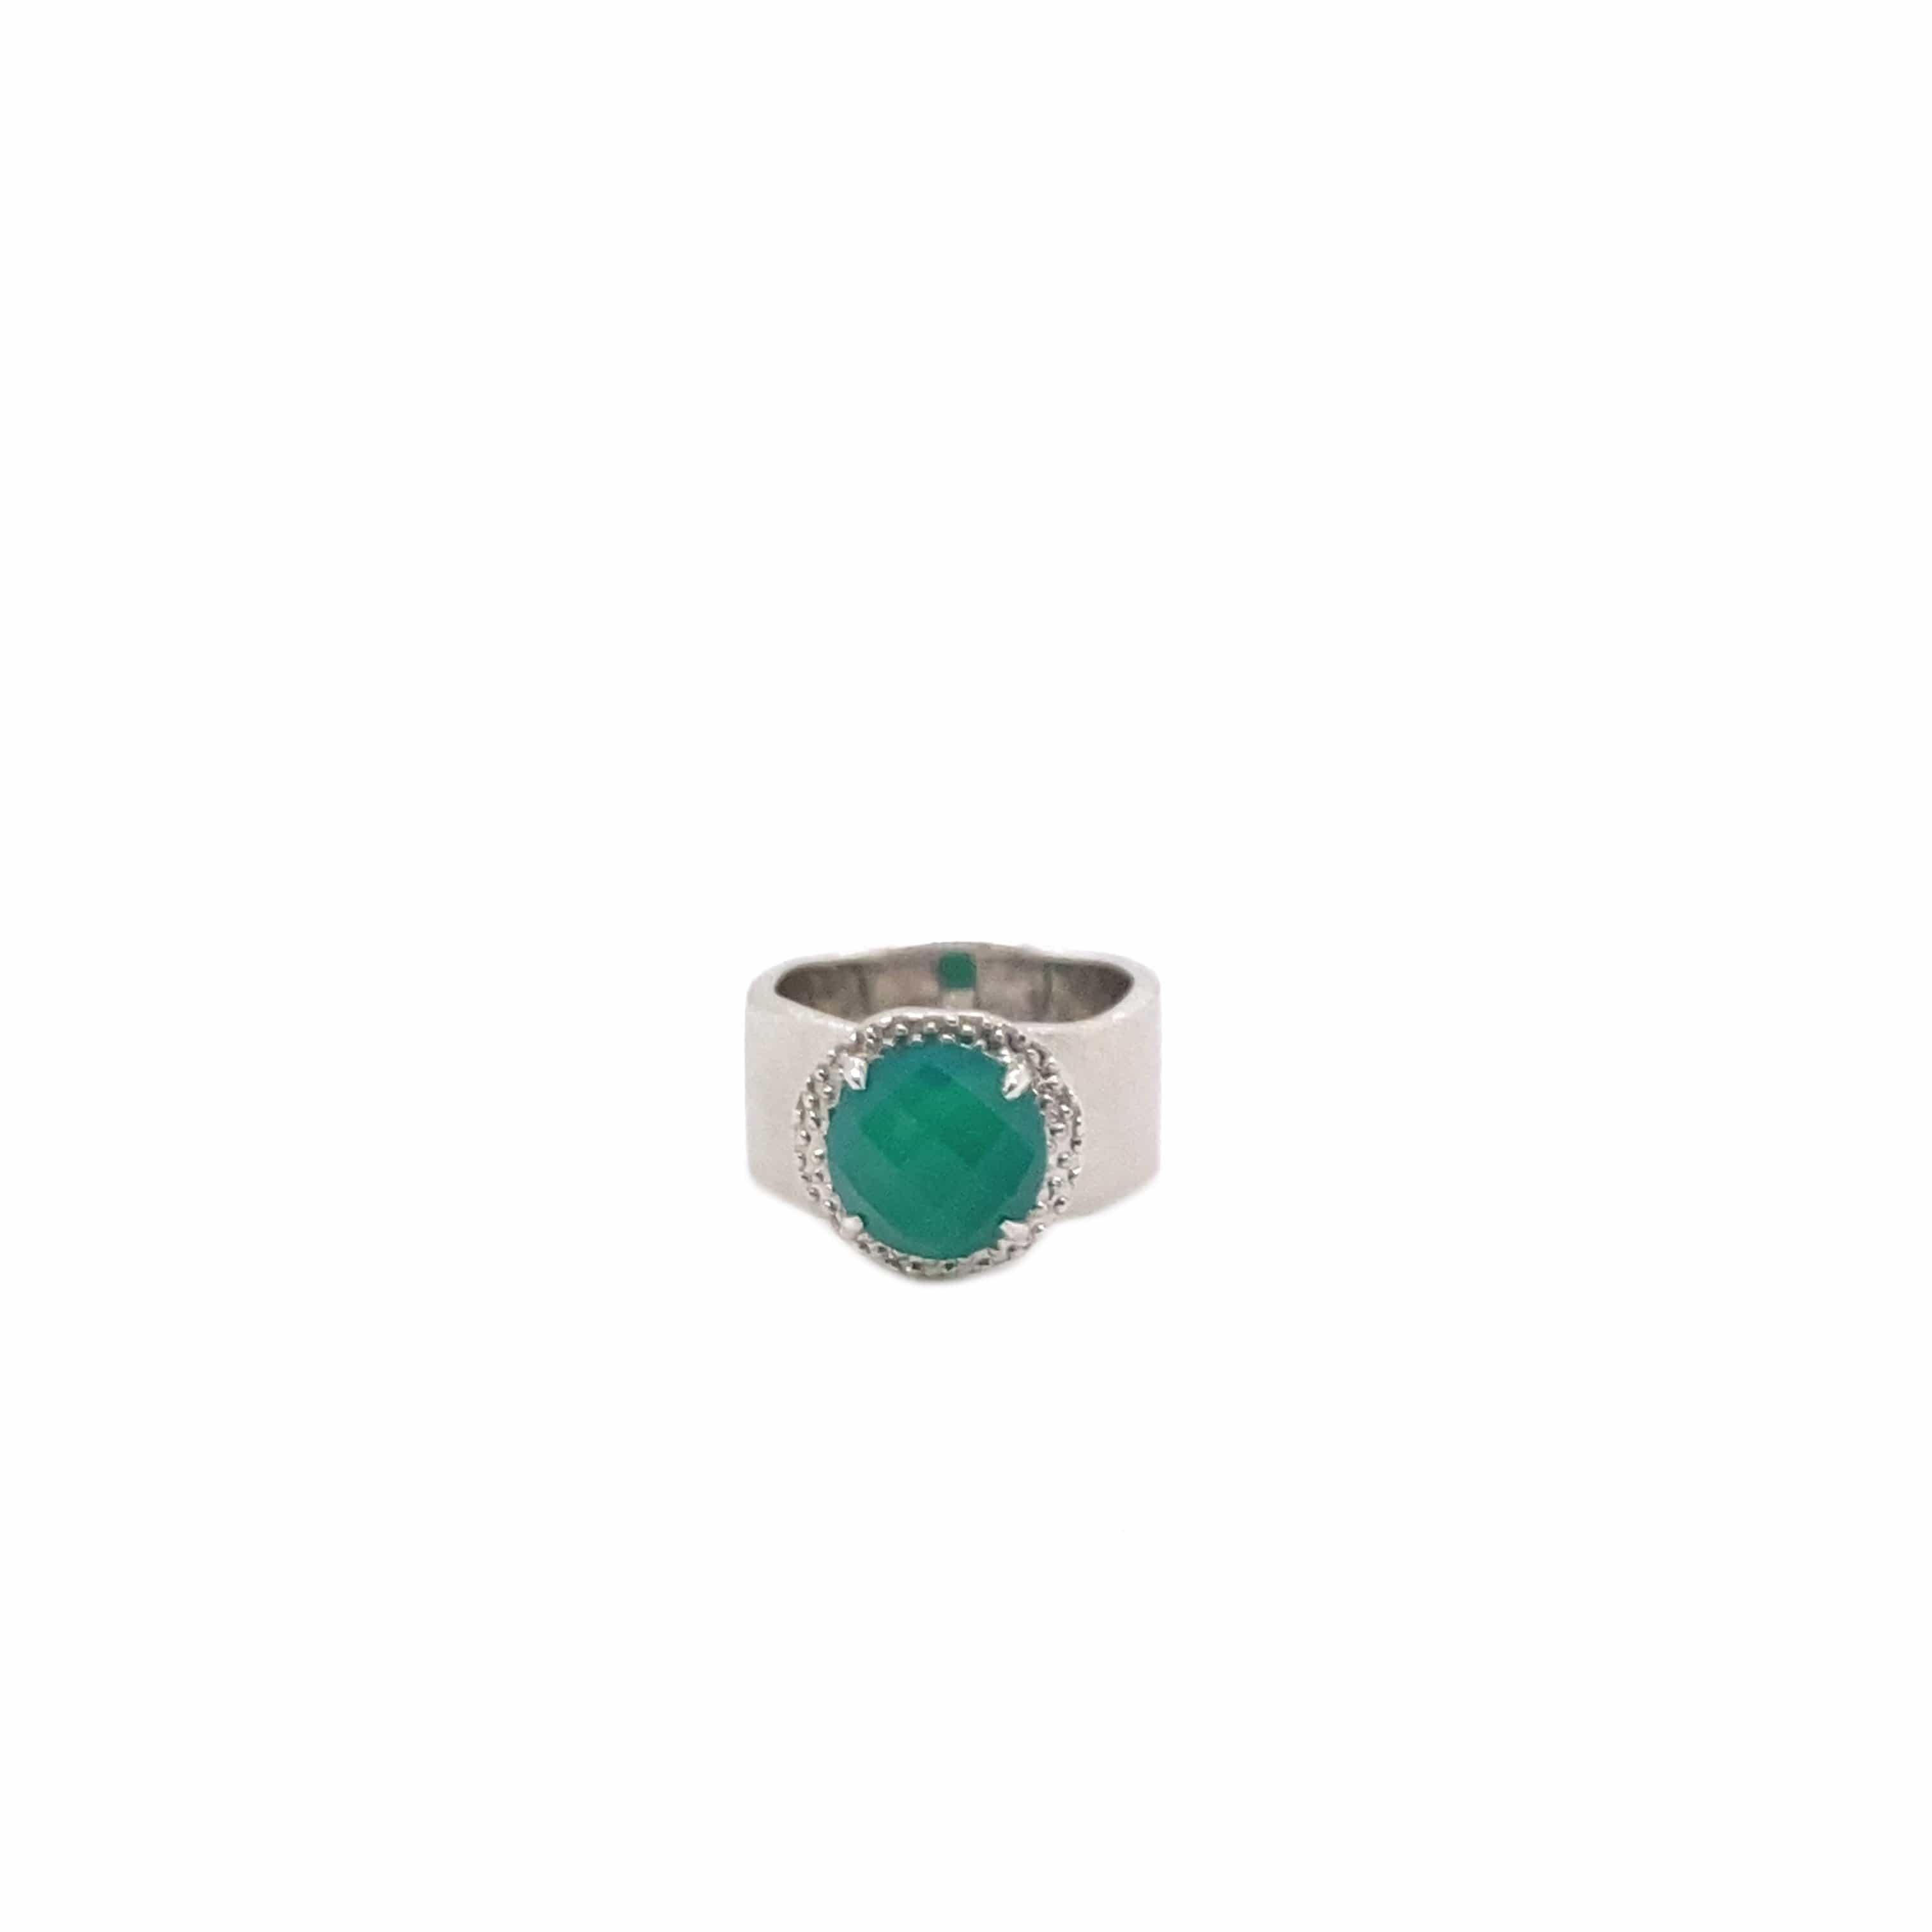 Rain Sterling Silver Green Agate Band Ring - Coomi